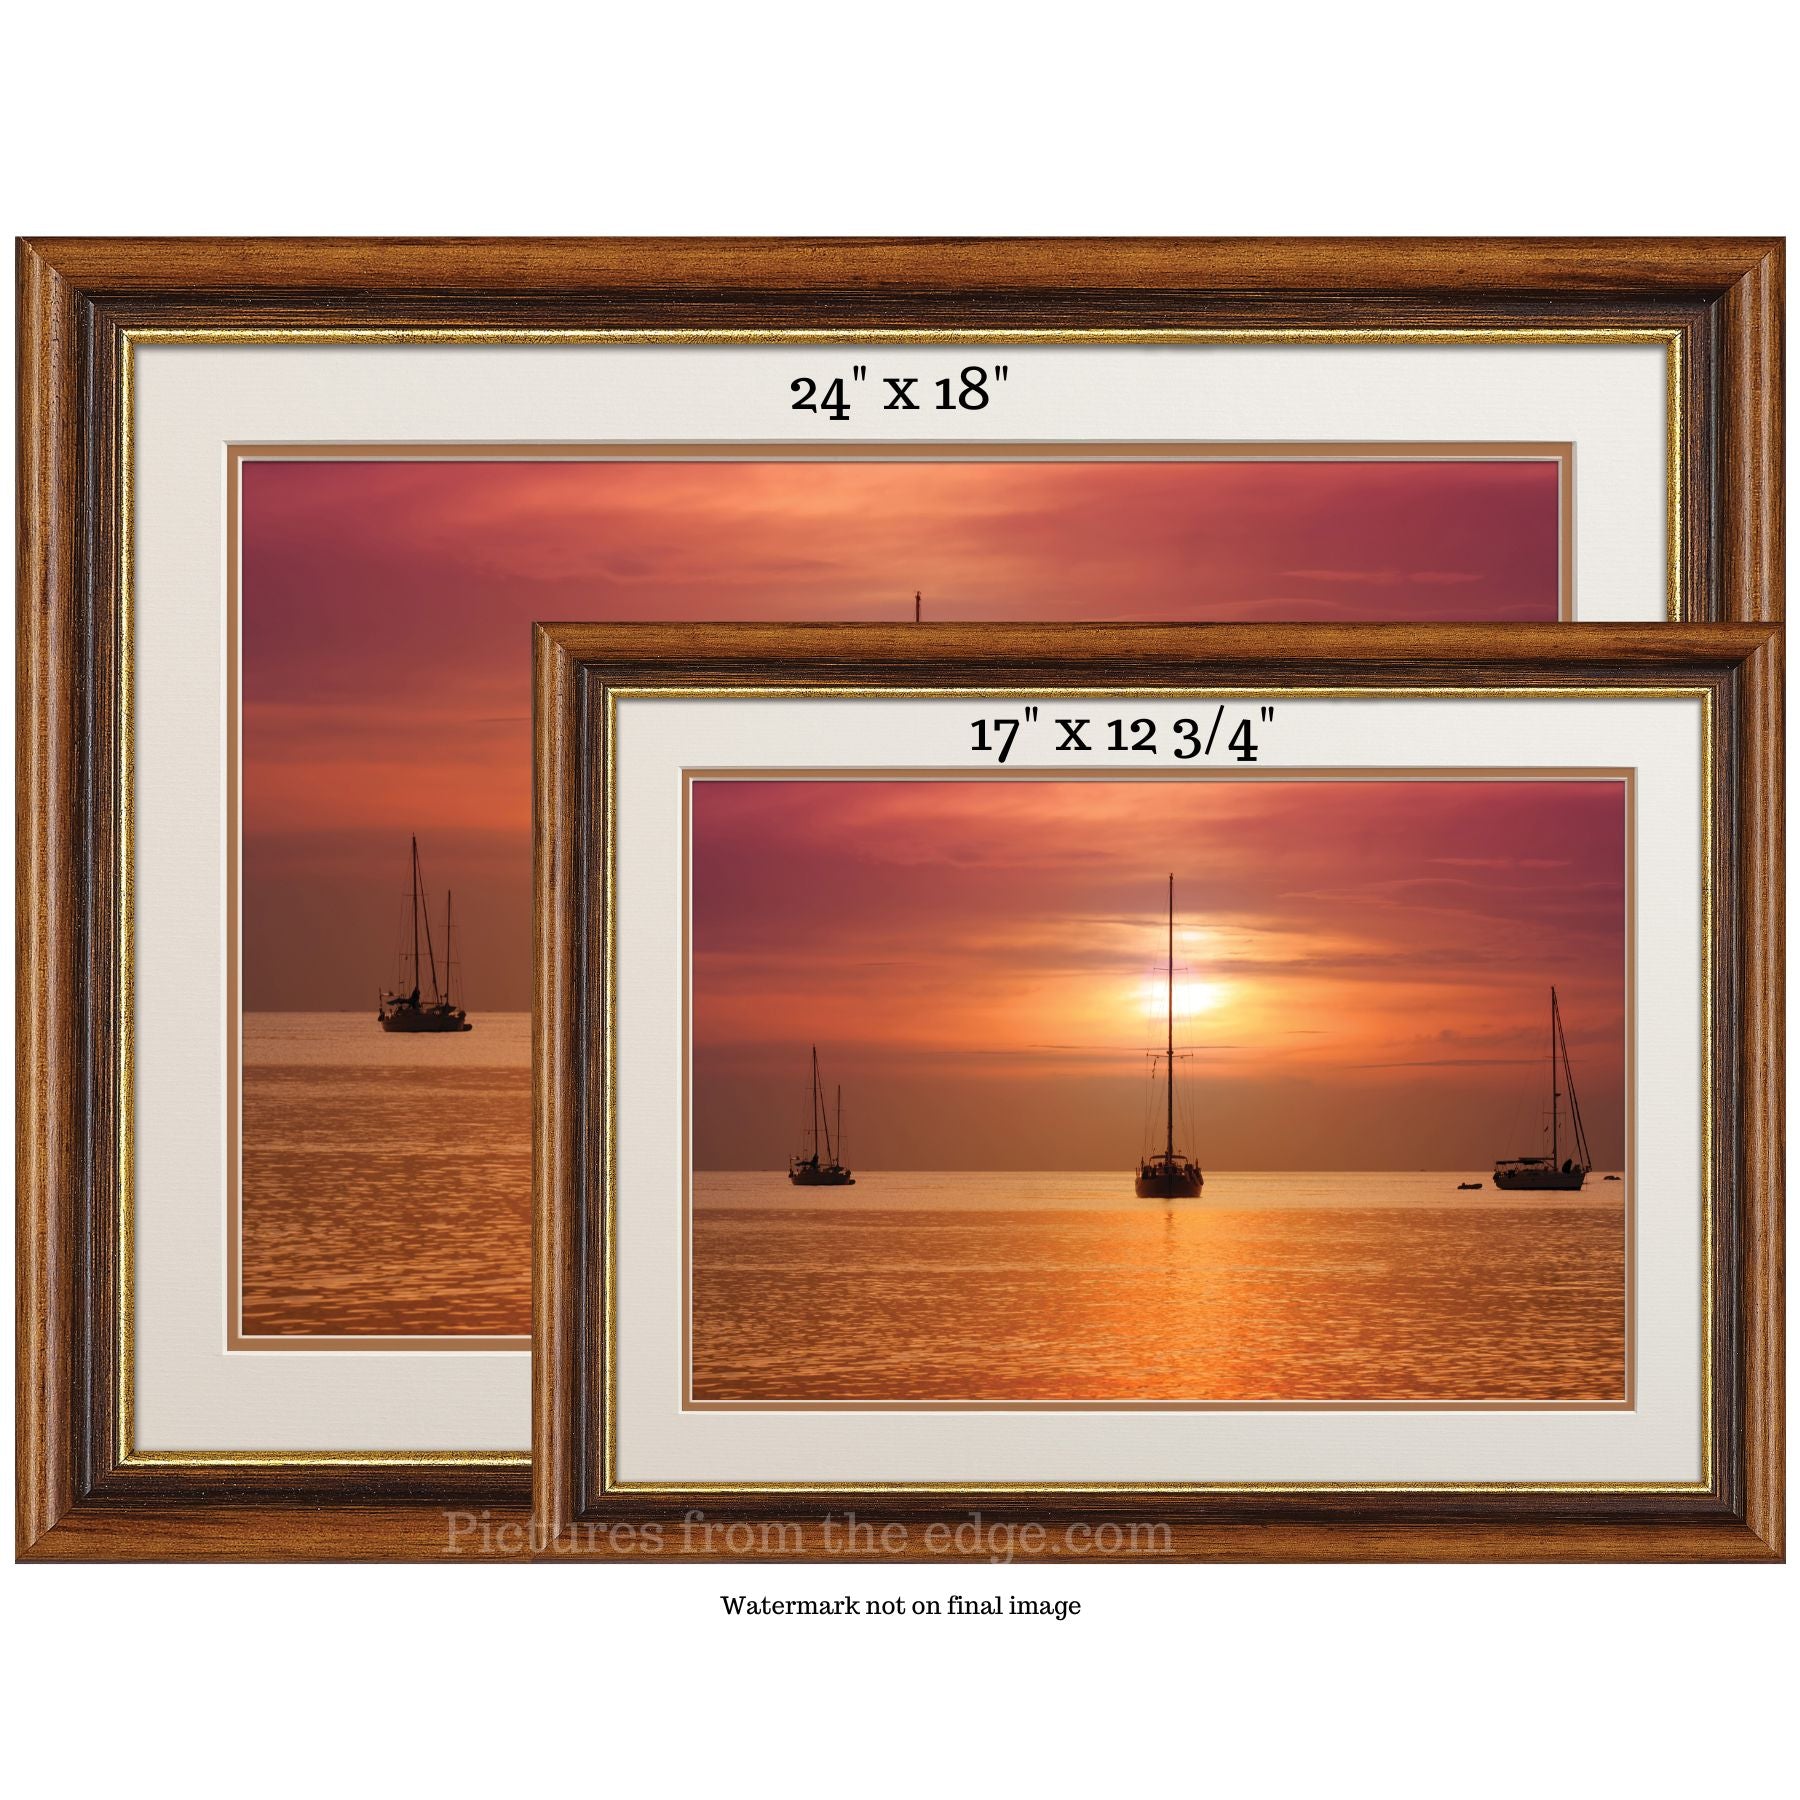 BeMoved by Sunset at Anchor Poster. Movable and Removable!